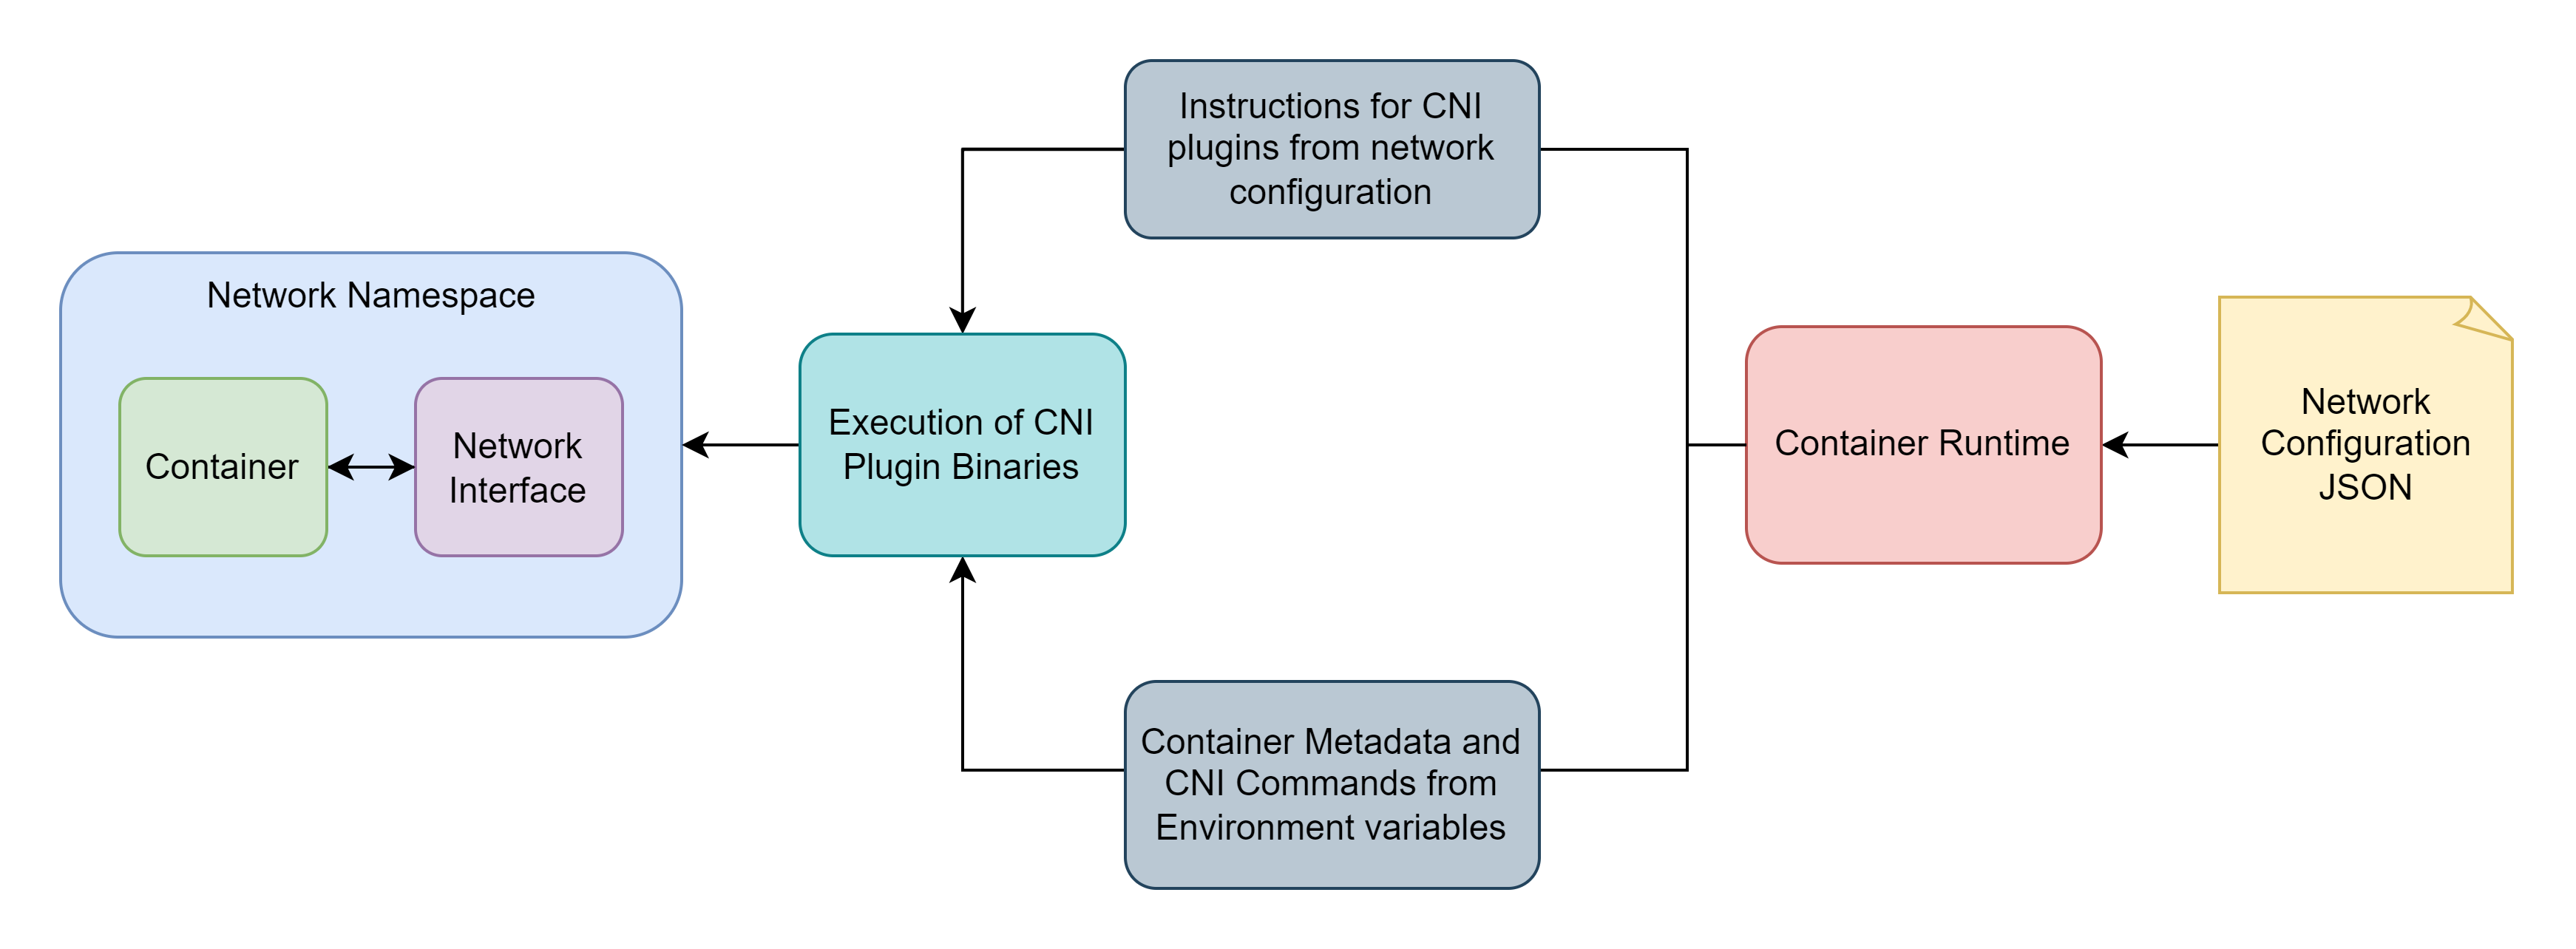 Execution of CNI Plugins by Container Runtime